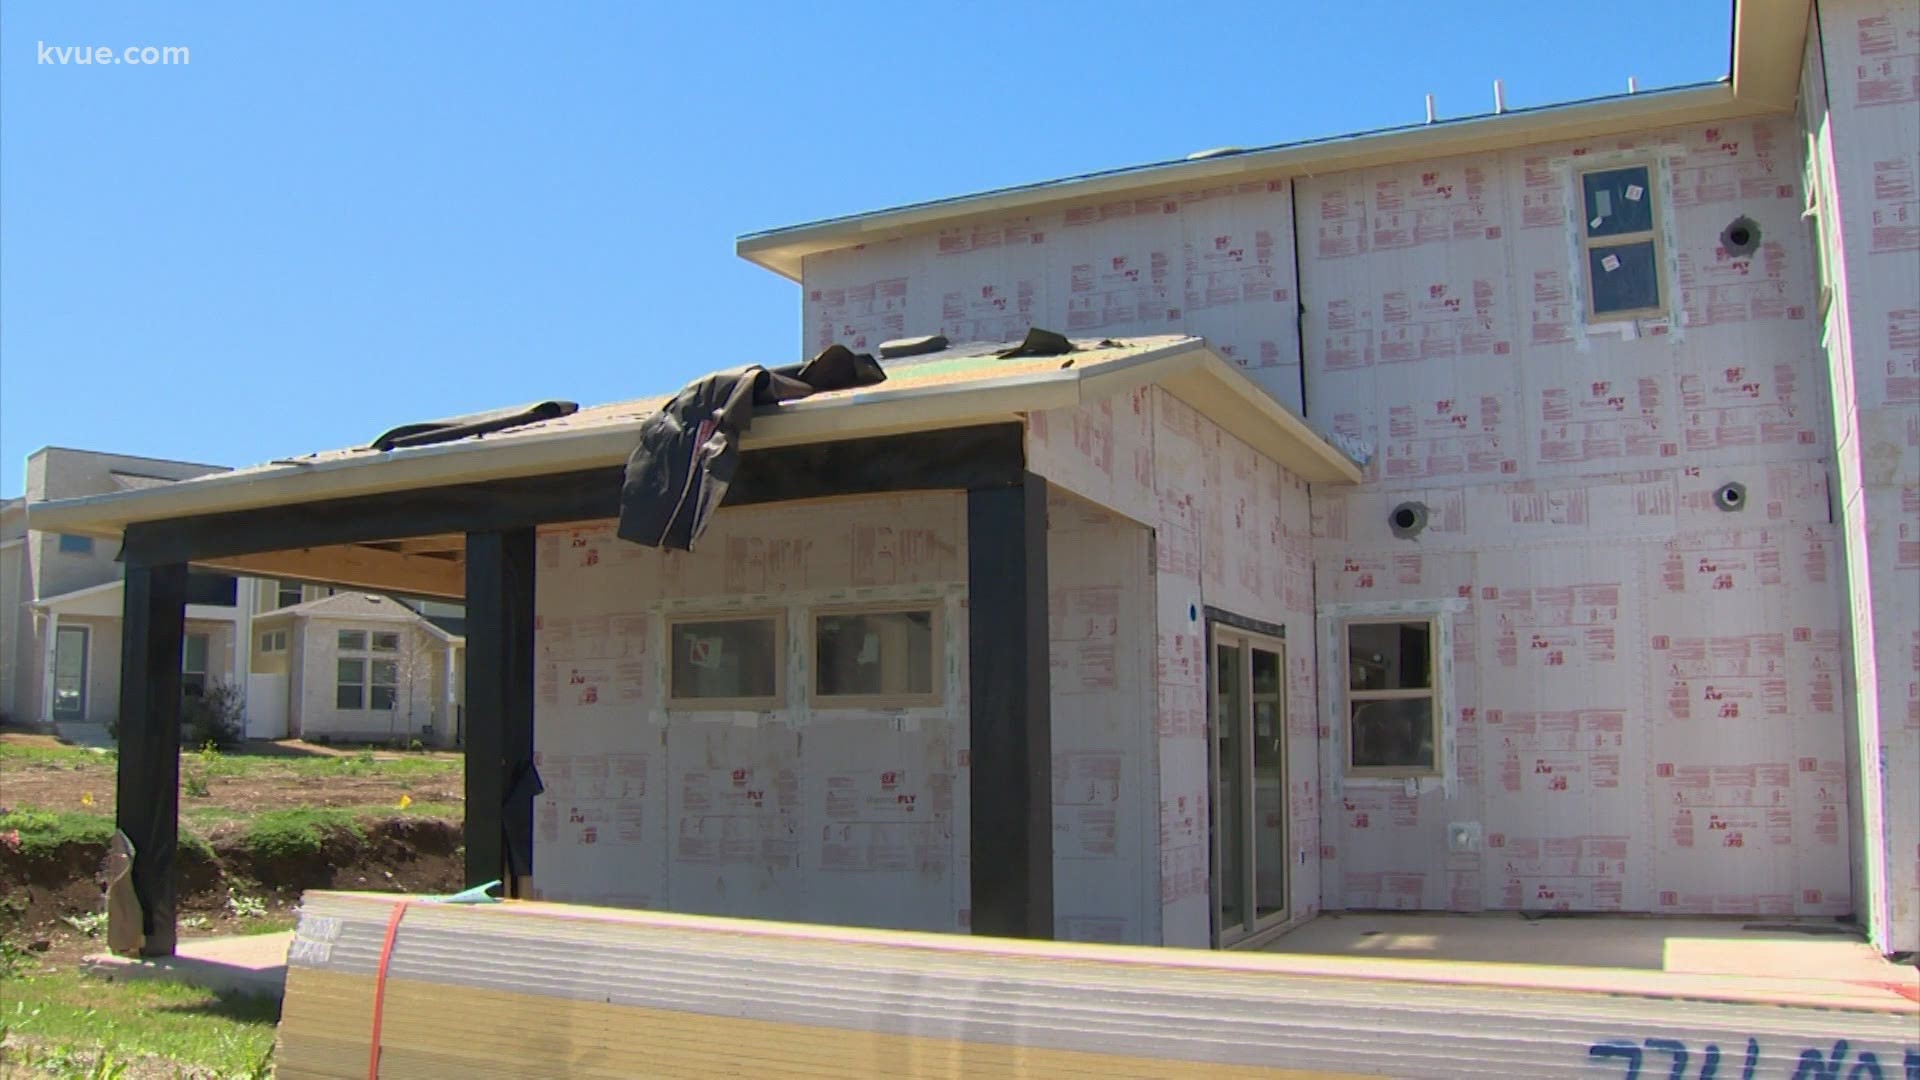 Building homes in the Austin area is becoming more expensive as the cost of lumber skyrockets. It's another issue facing the high-demand housing market.